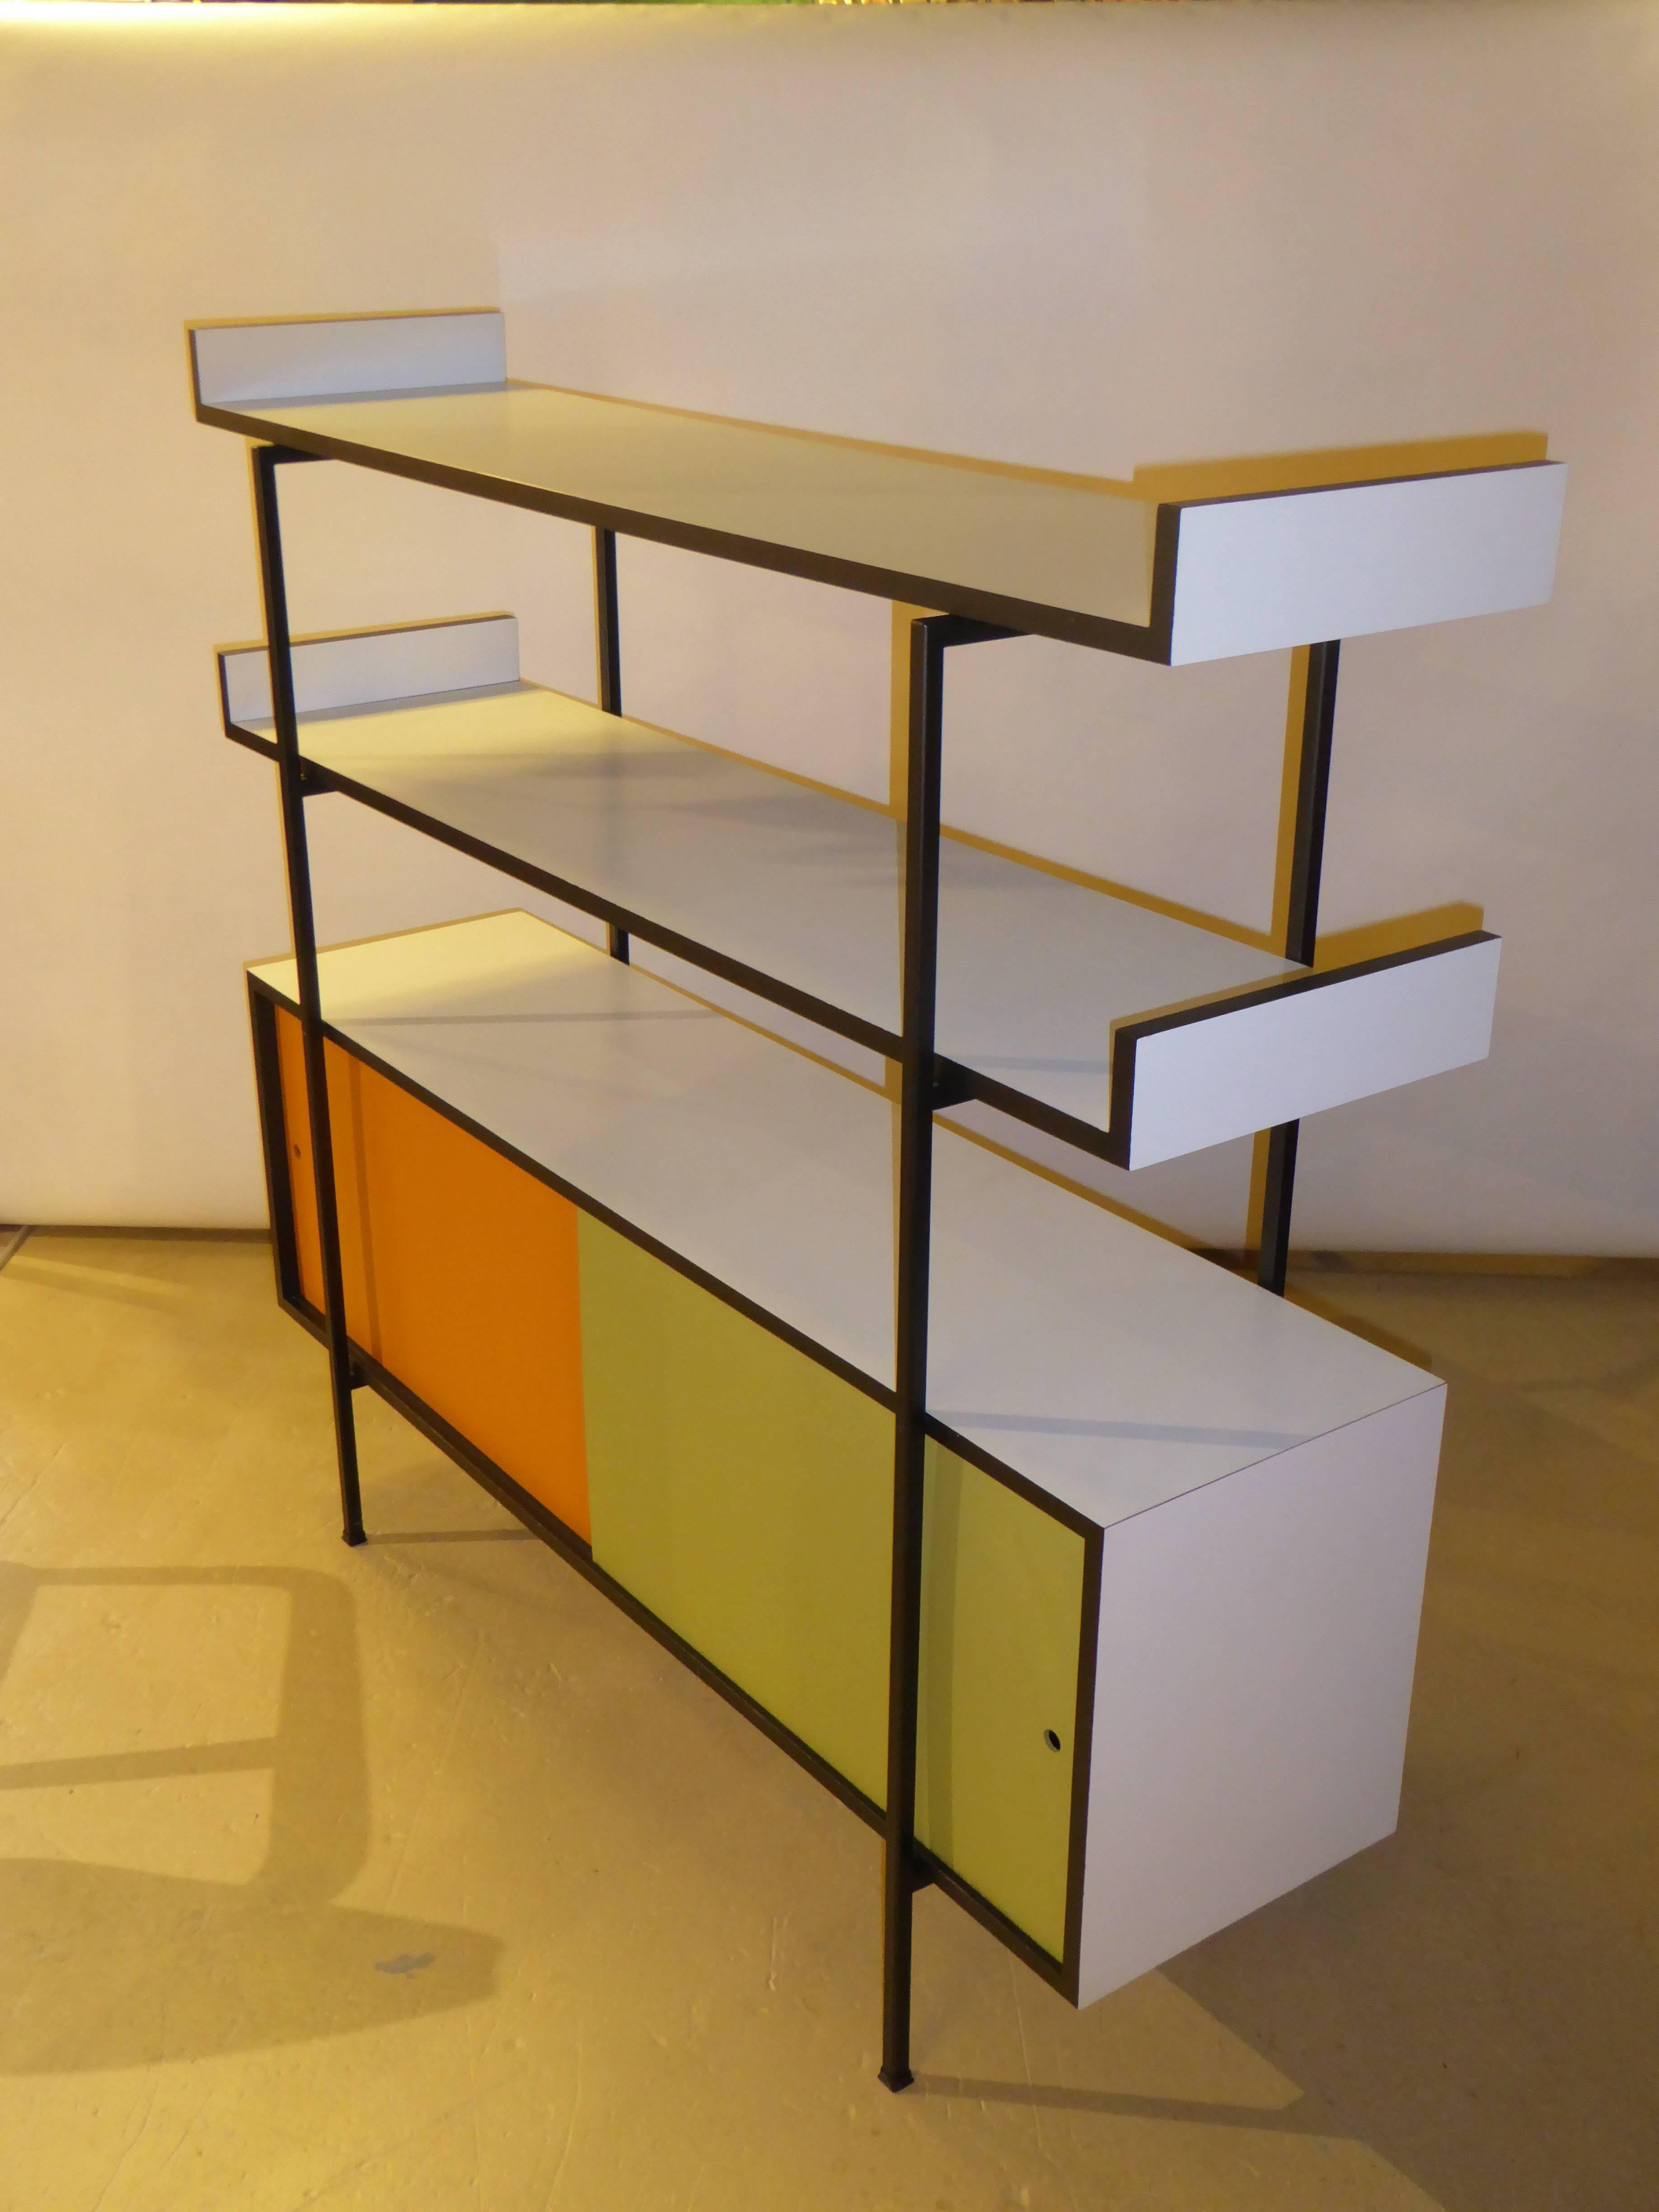 Painted 1950s Credenza Shelves Room Divider in the Manner of Paul McCobb